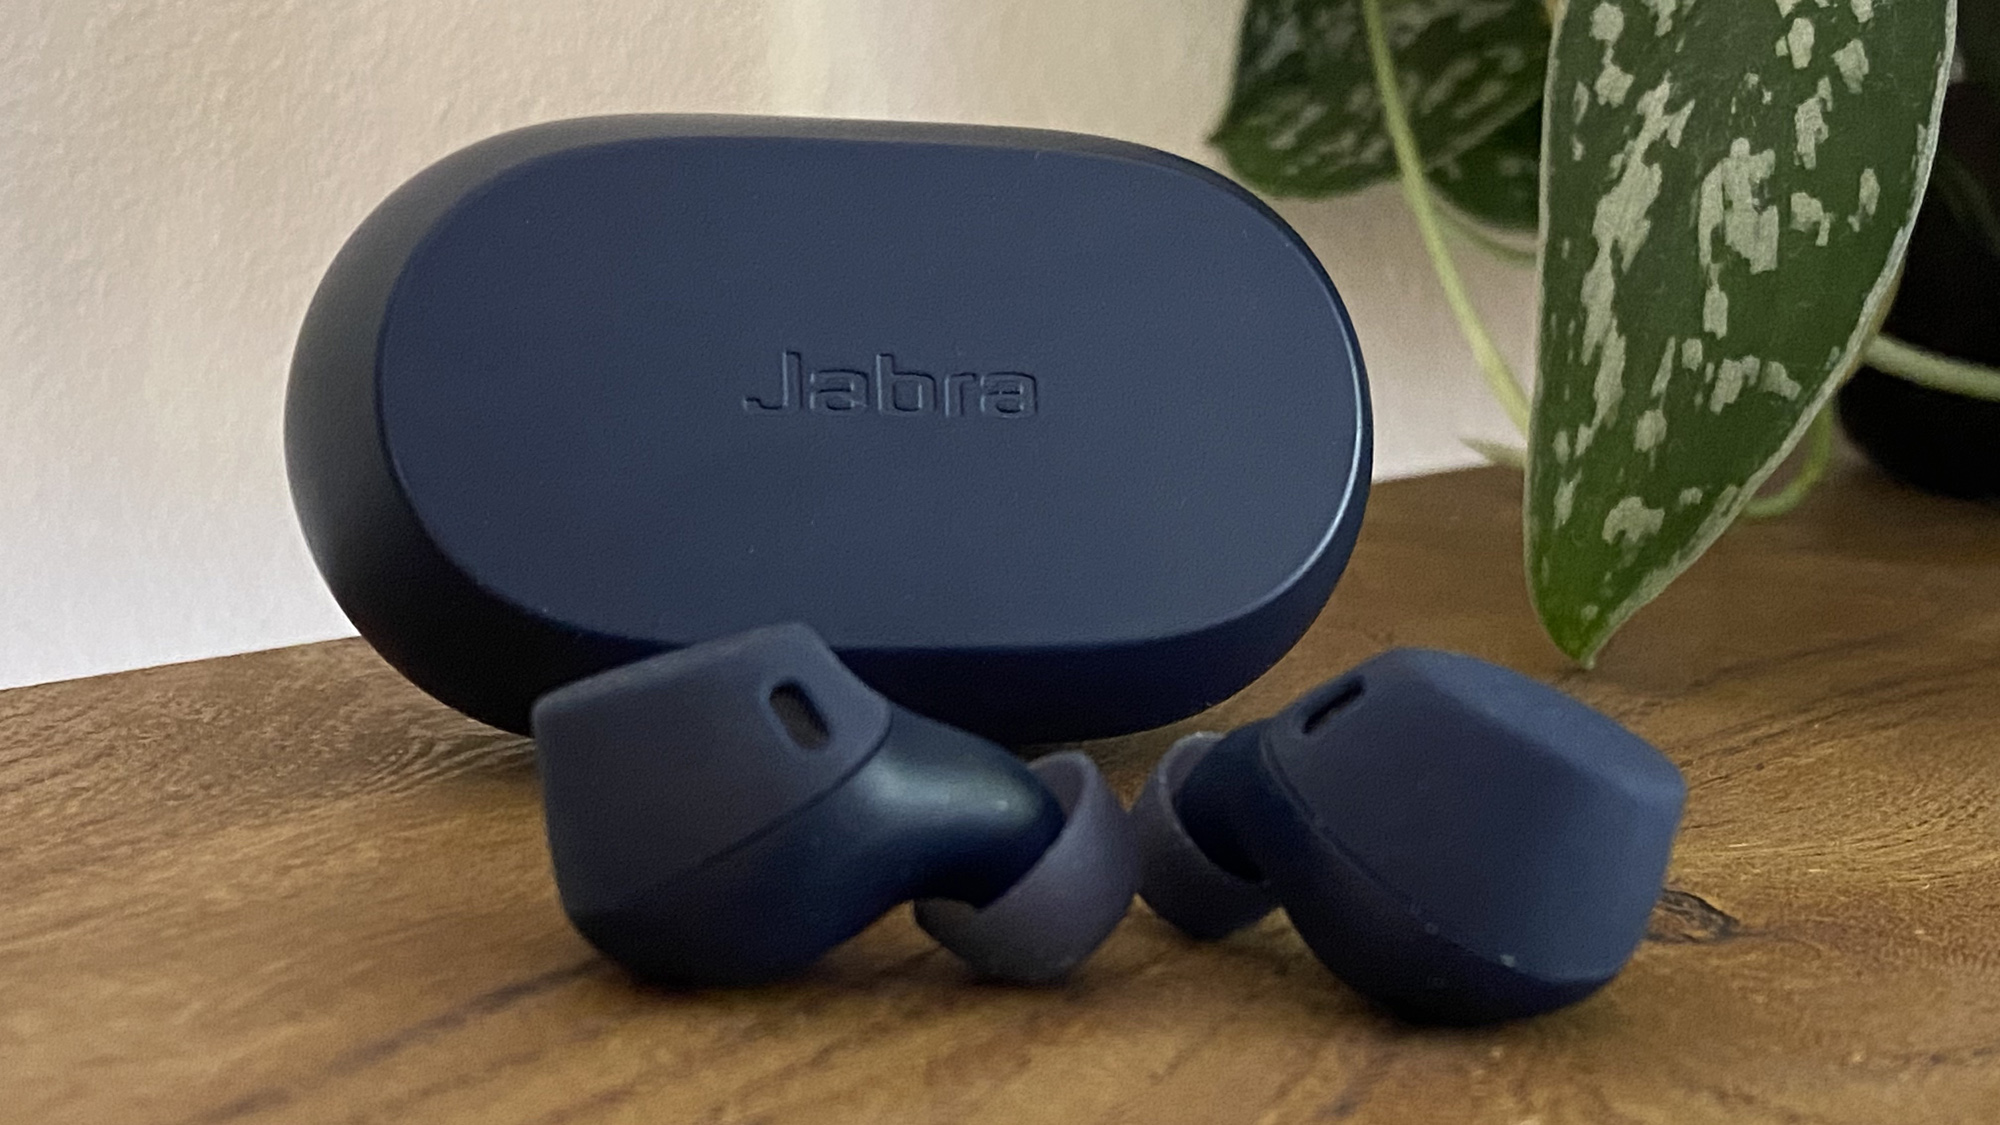 Jabra Elite 7 Active workout earbuds out of the charging case